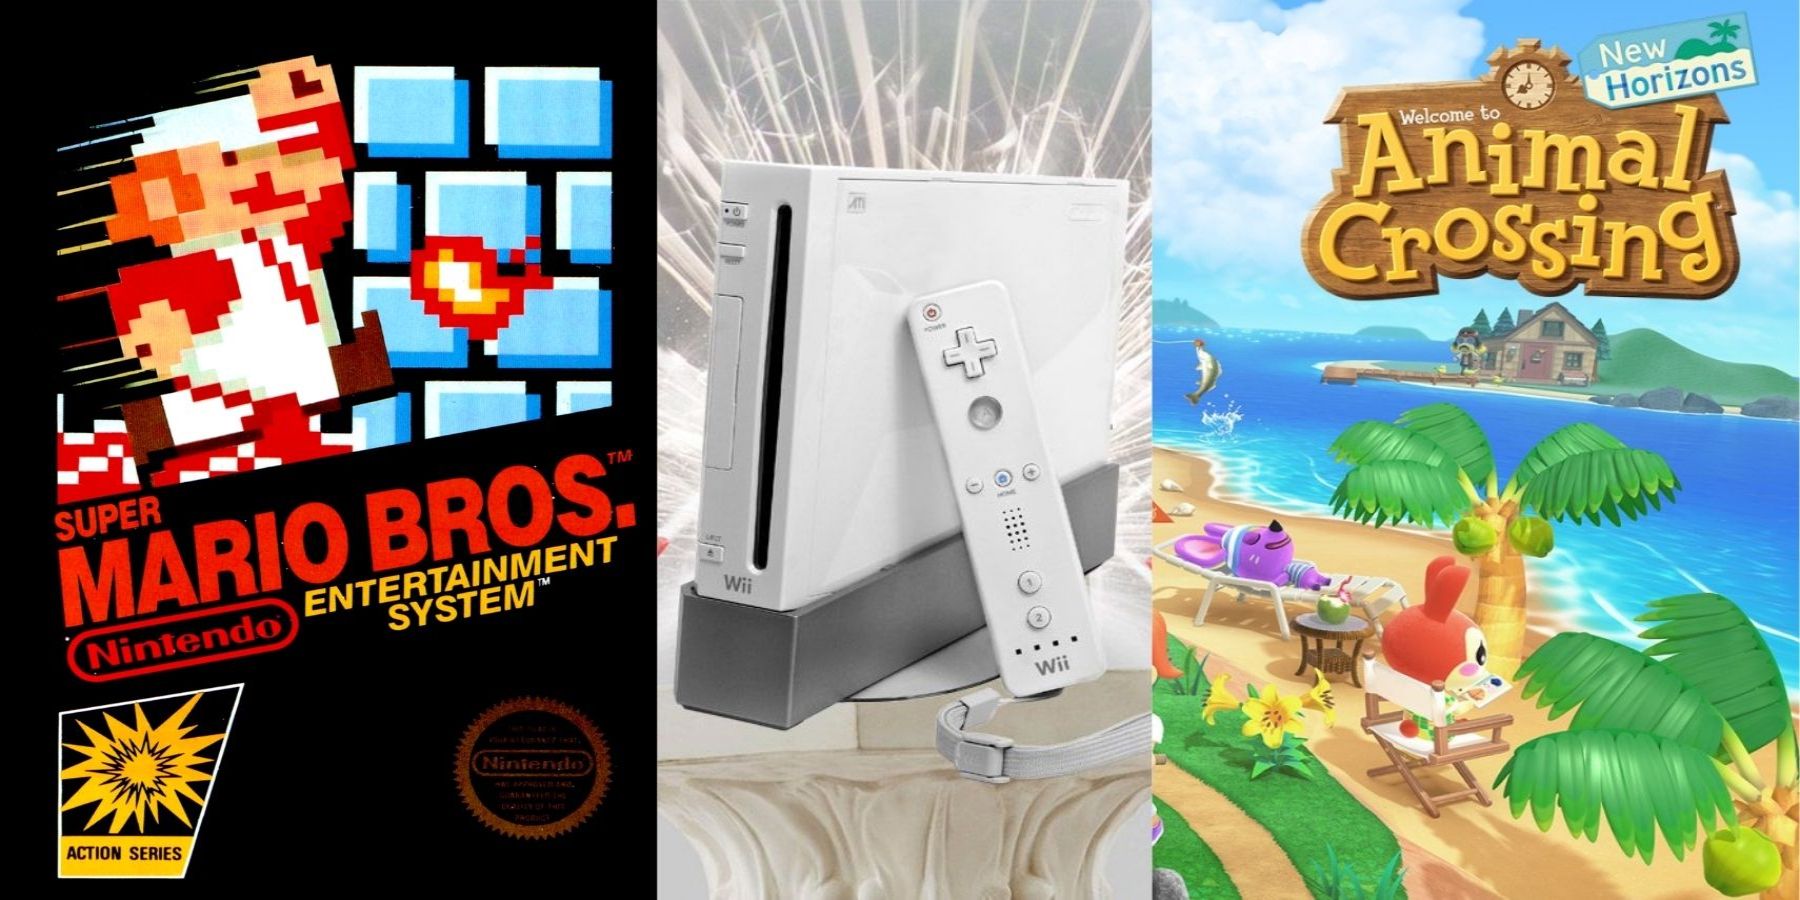 Triple split image of Mario NES game, the Wii, and Animal Crossing: New Horizons video game.